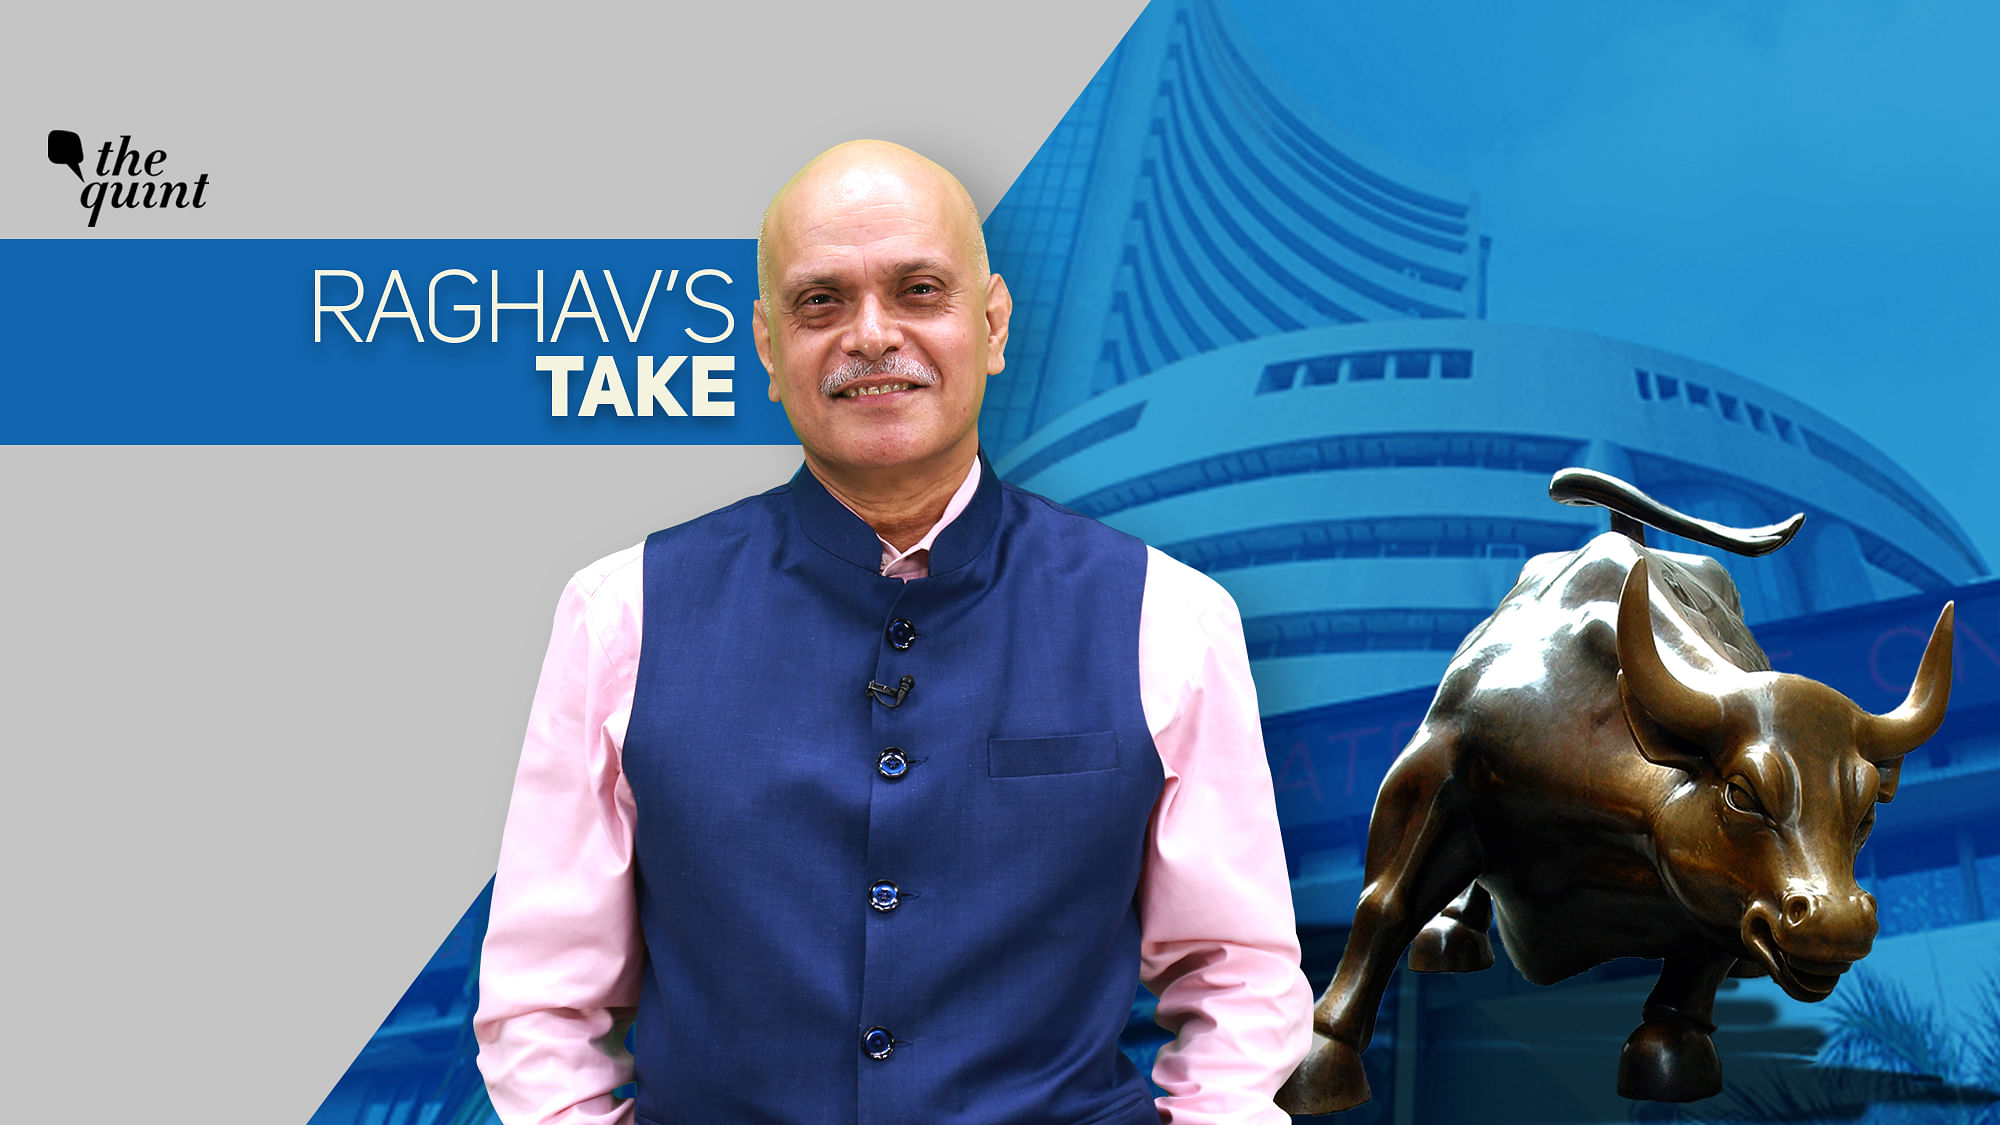 It’s now time to kill the dissonance and move “one way” on the highway to bold reforms, says Raghav Bahl.